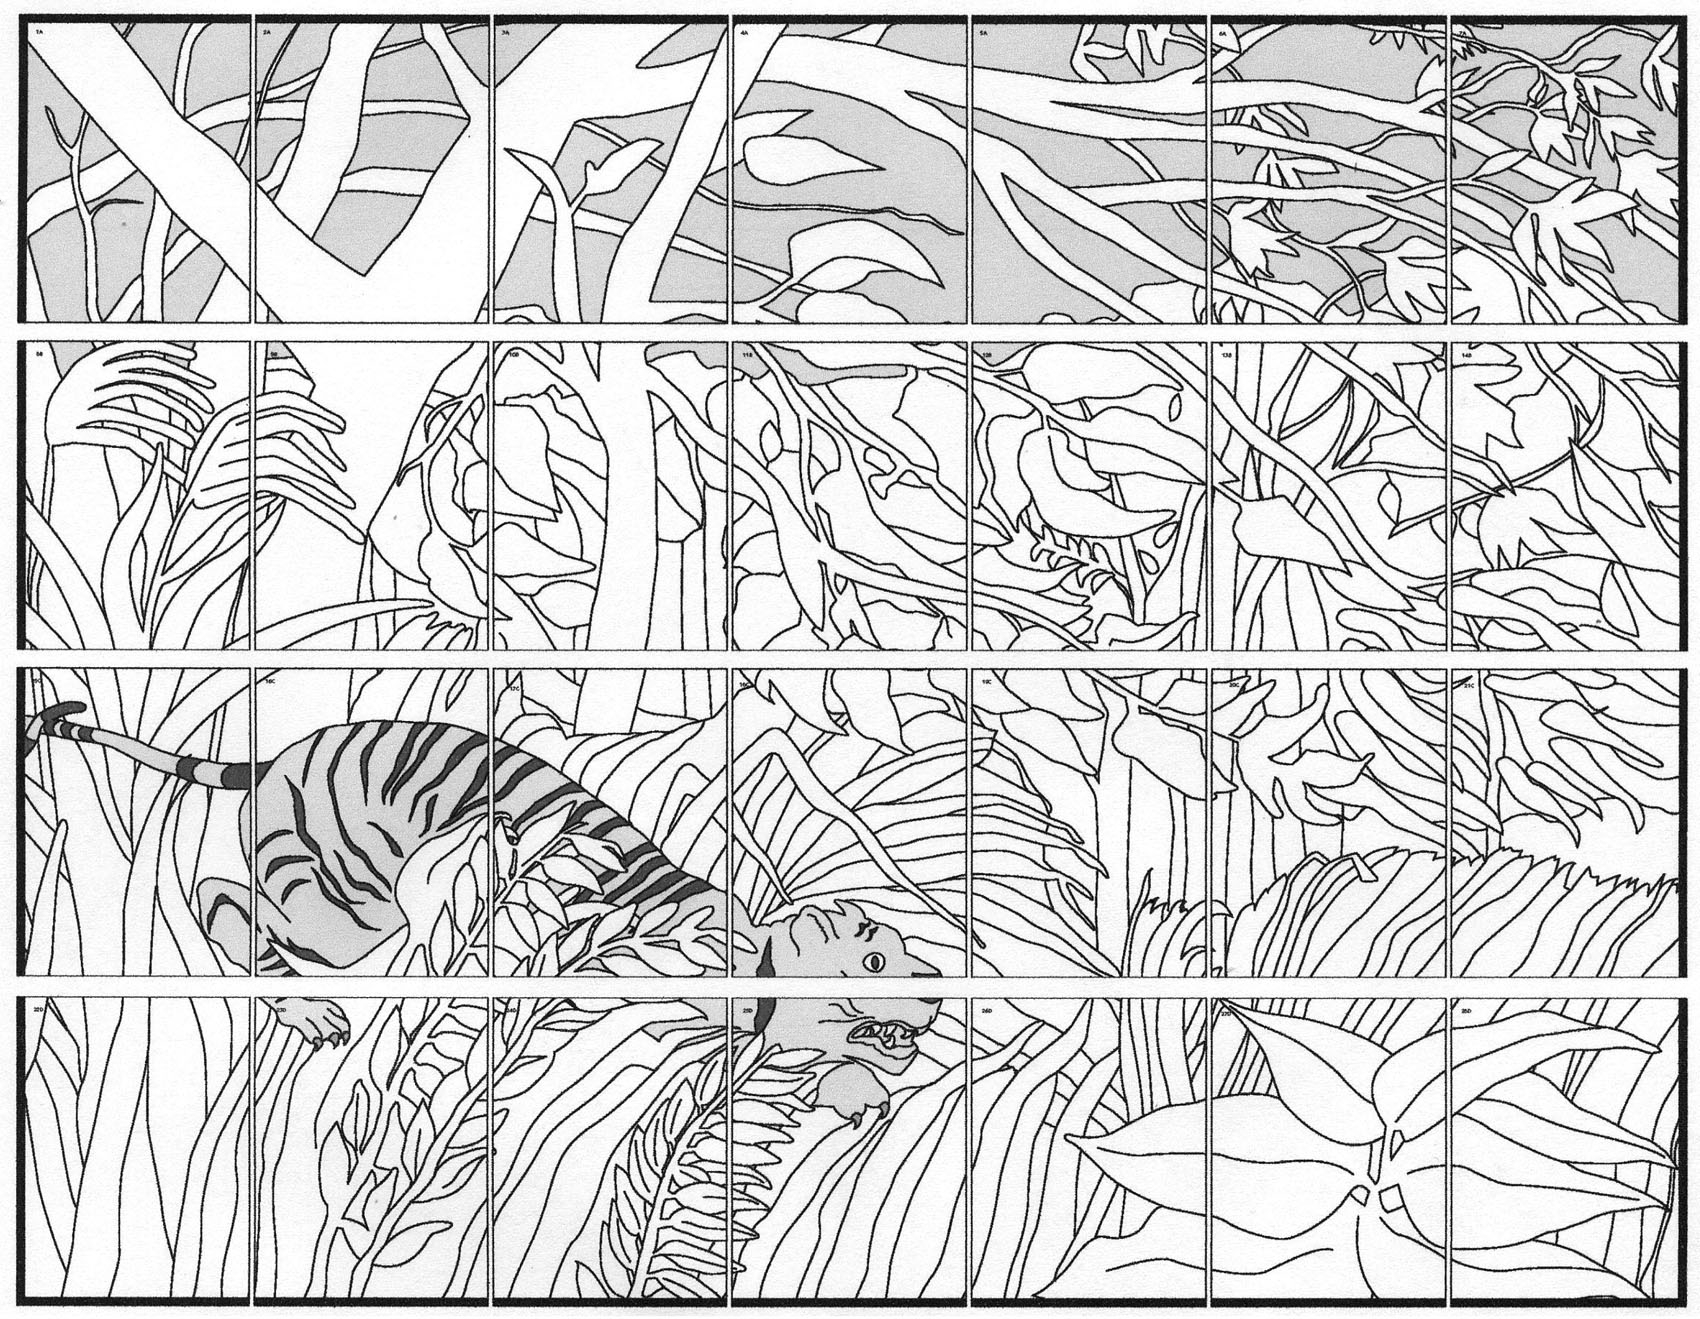 Mural Coloring Pages at GetDrawings Free download